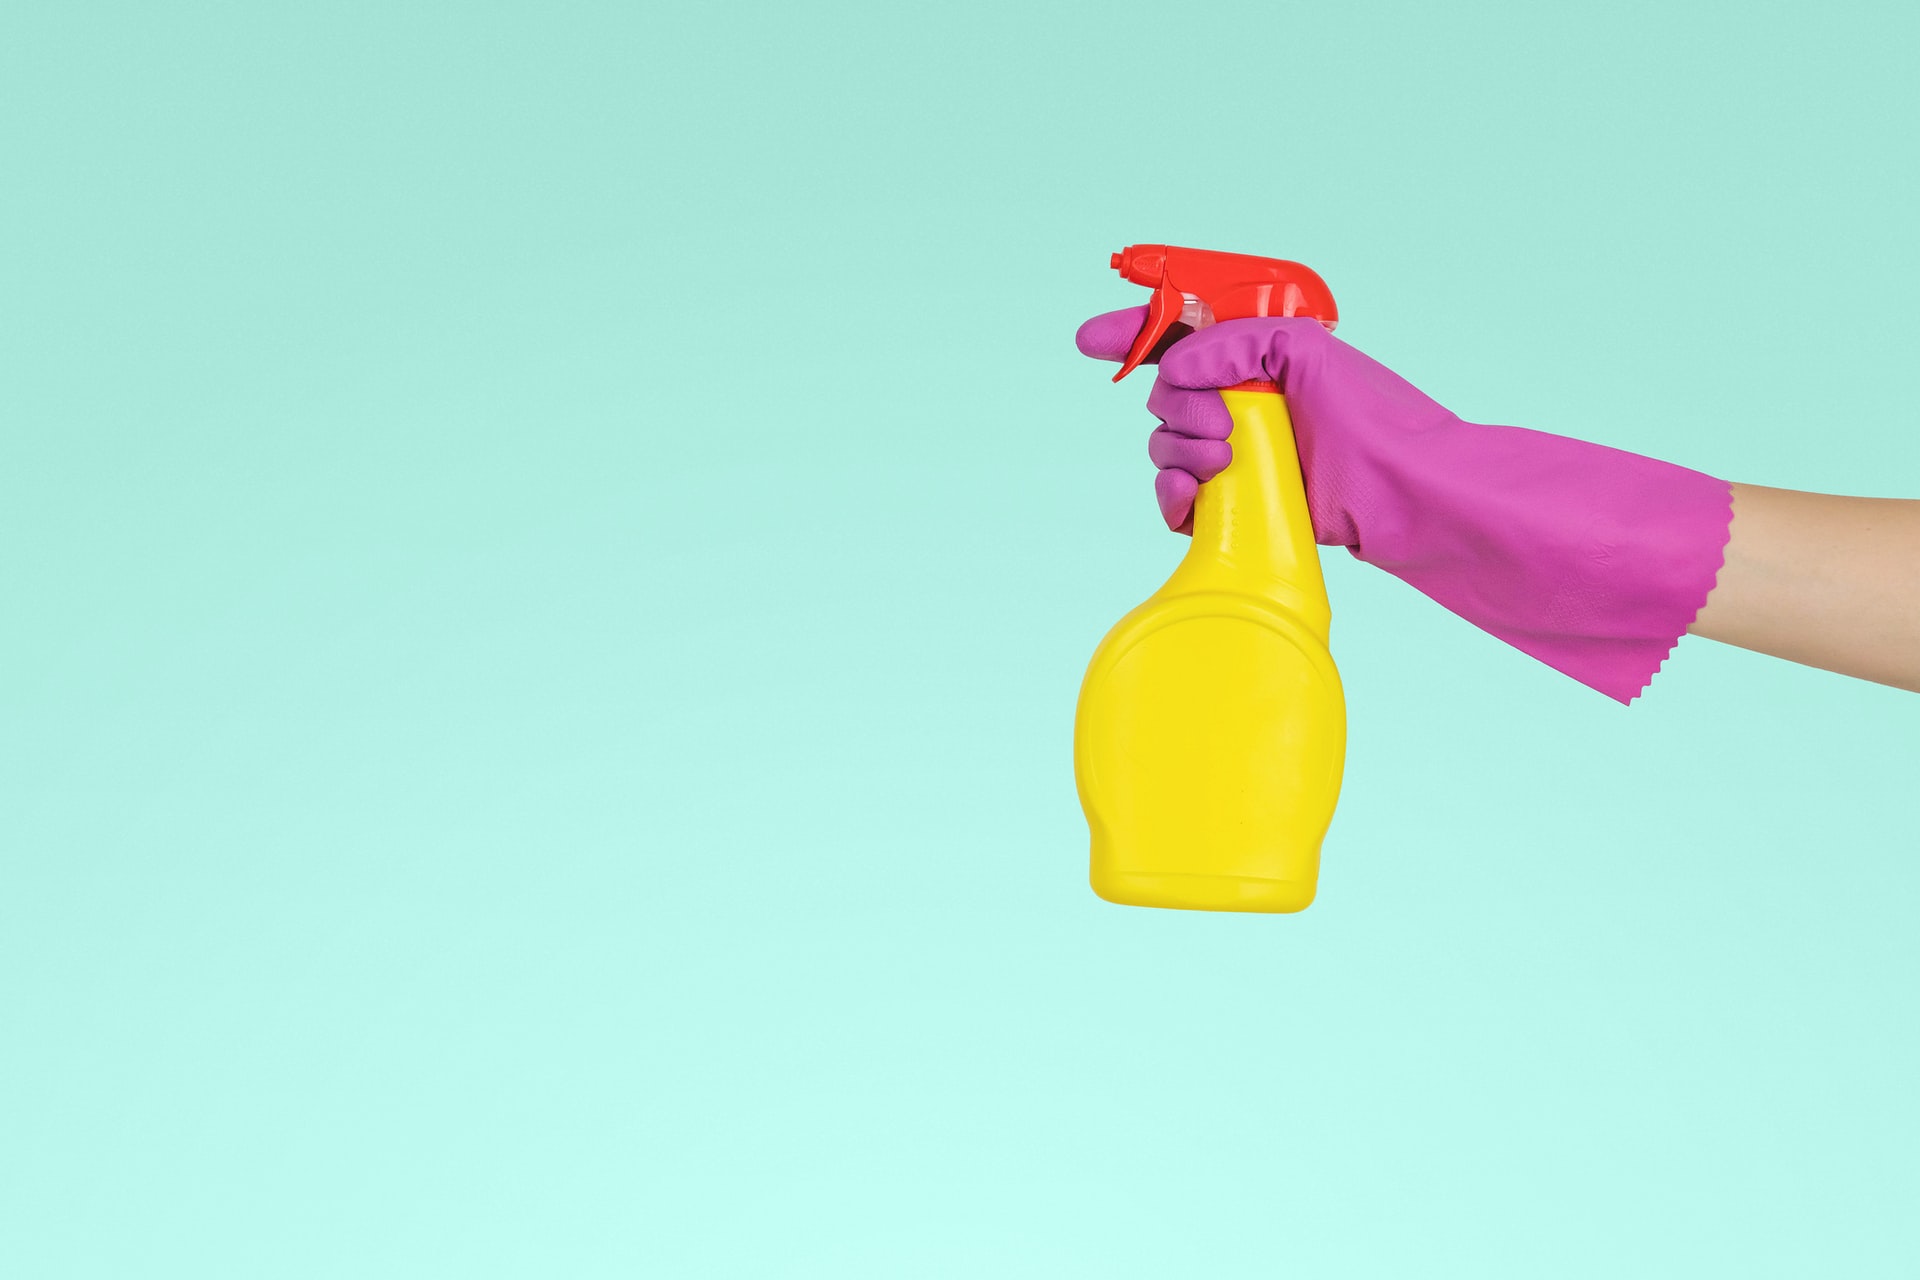 hand wearing purple rubber glove holding a bright yellow spray bottle